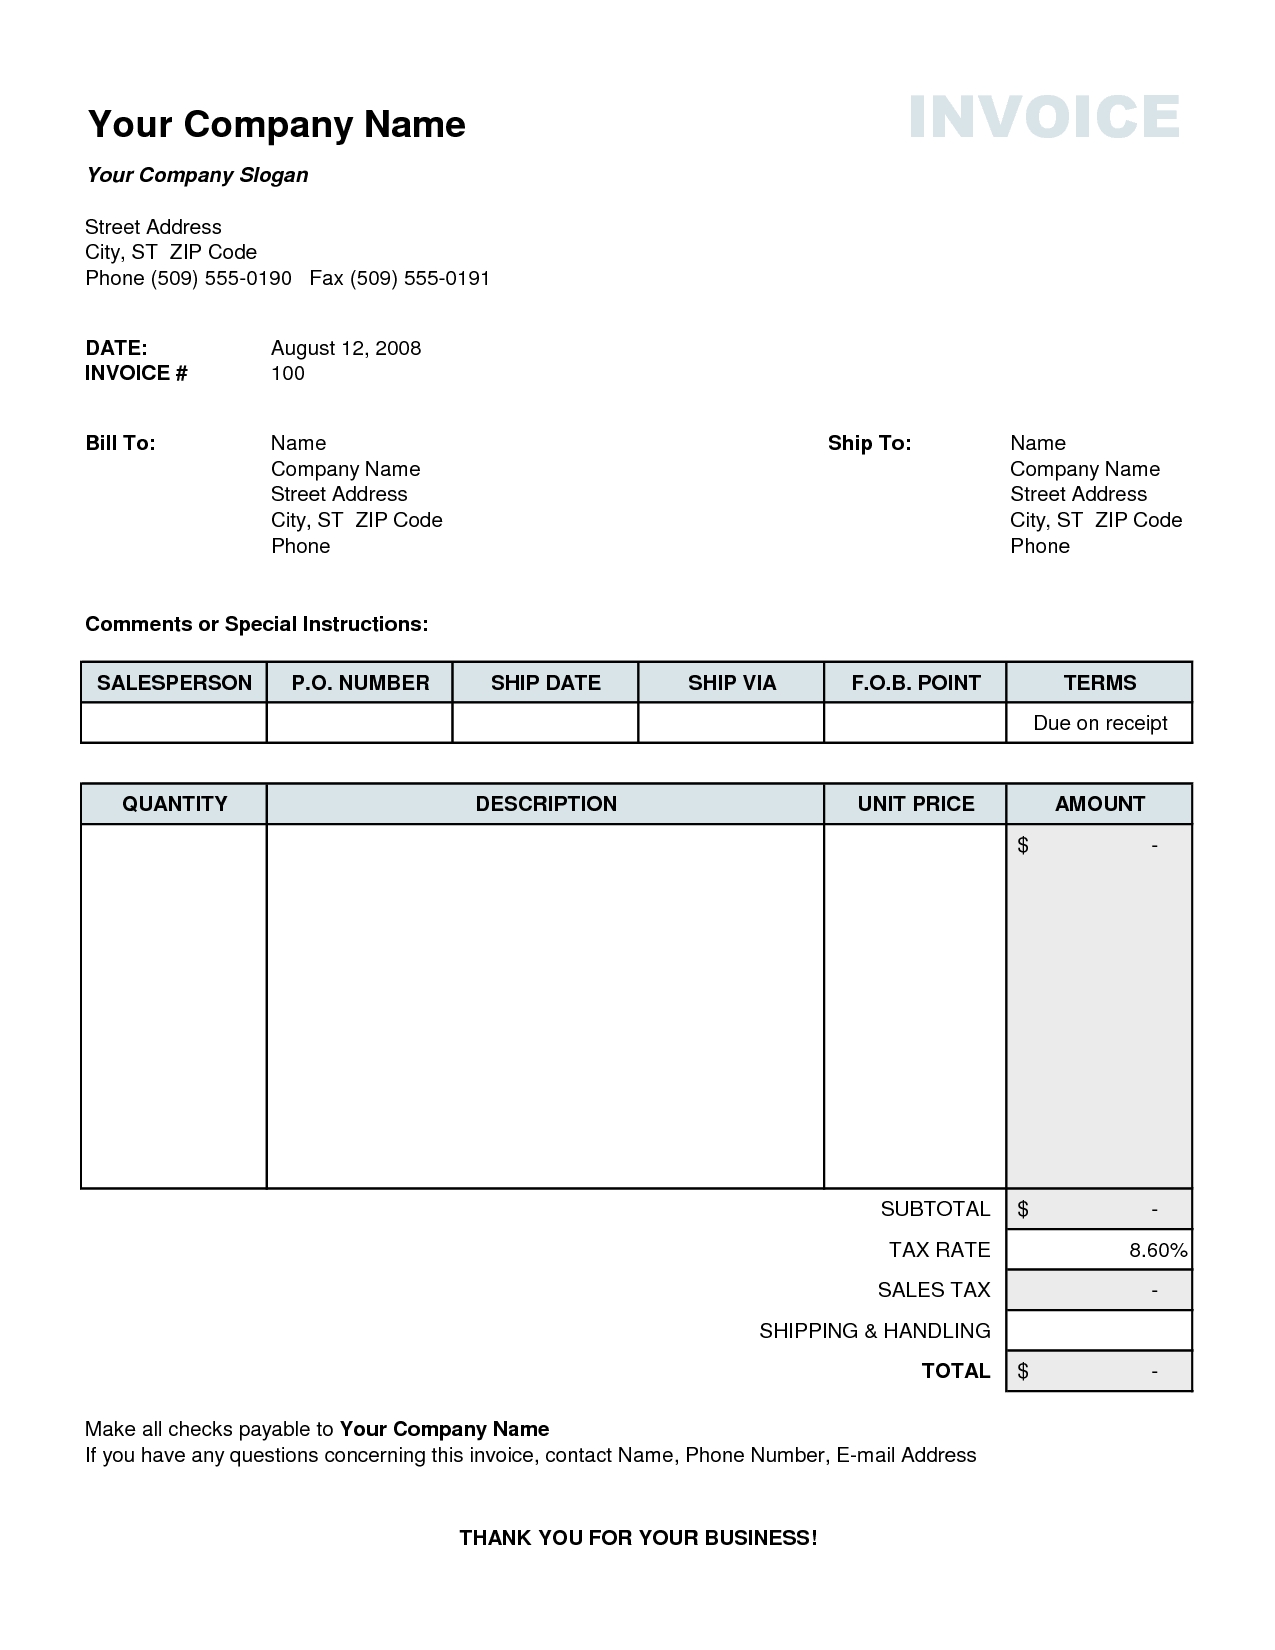 sales invoice template invoice templat sales invoice sample free excel tax invoice template